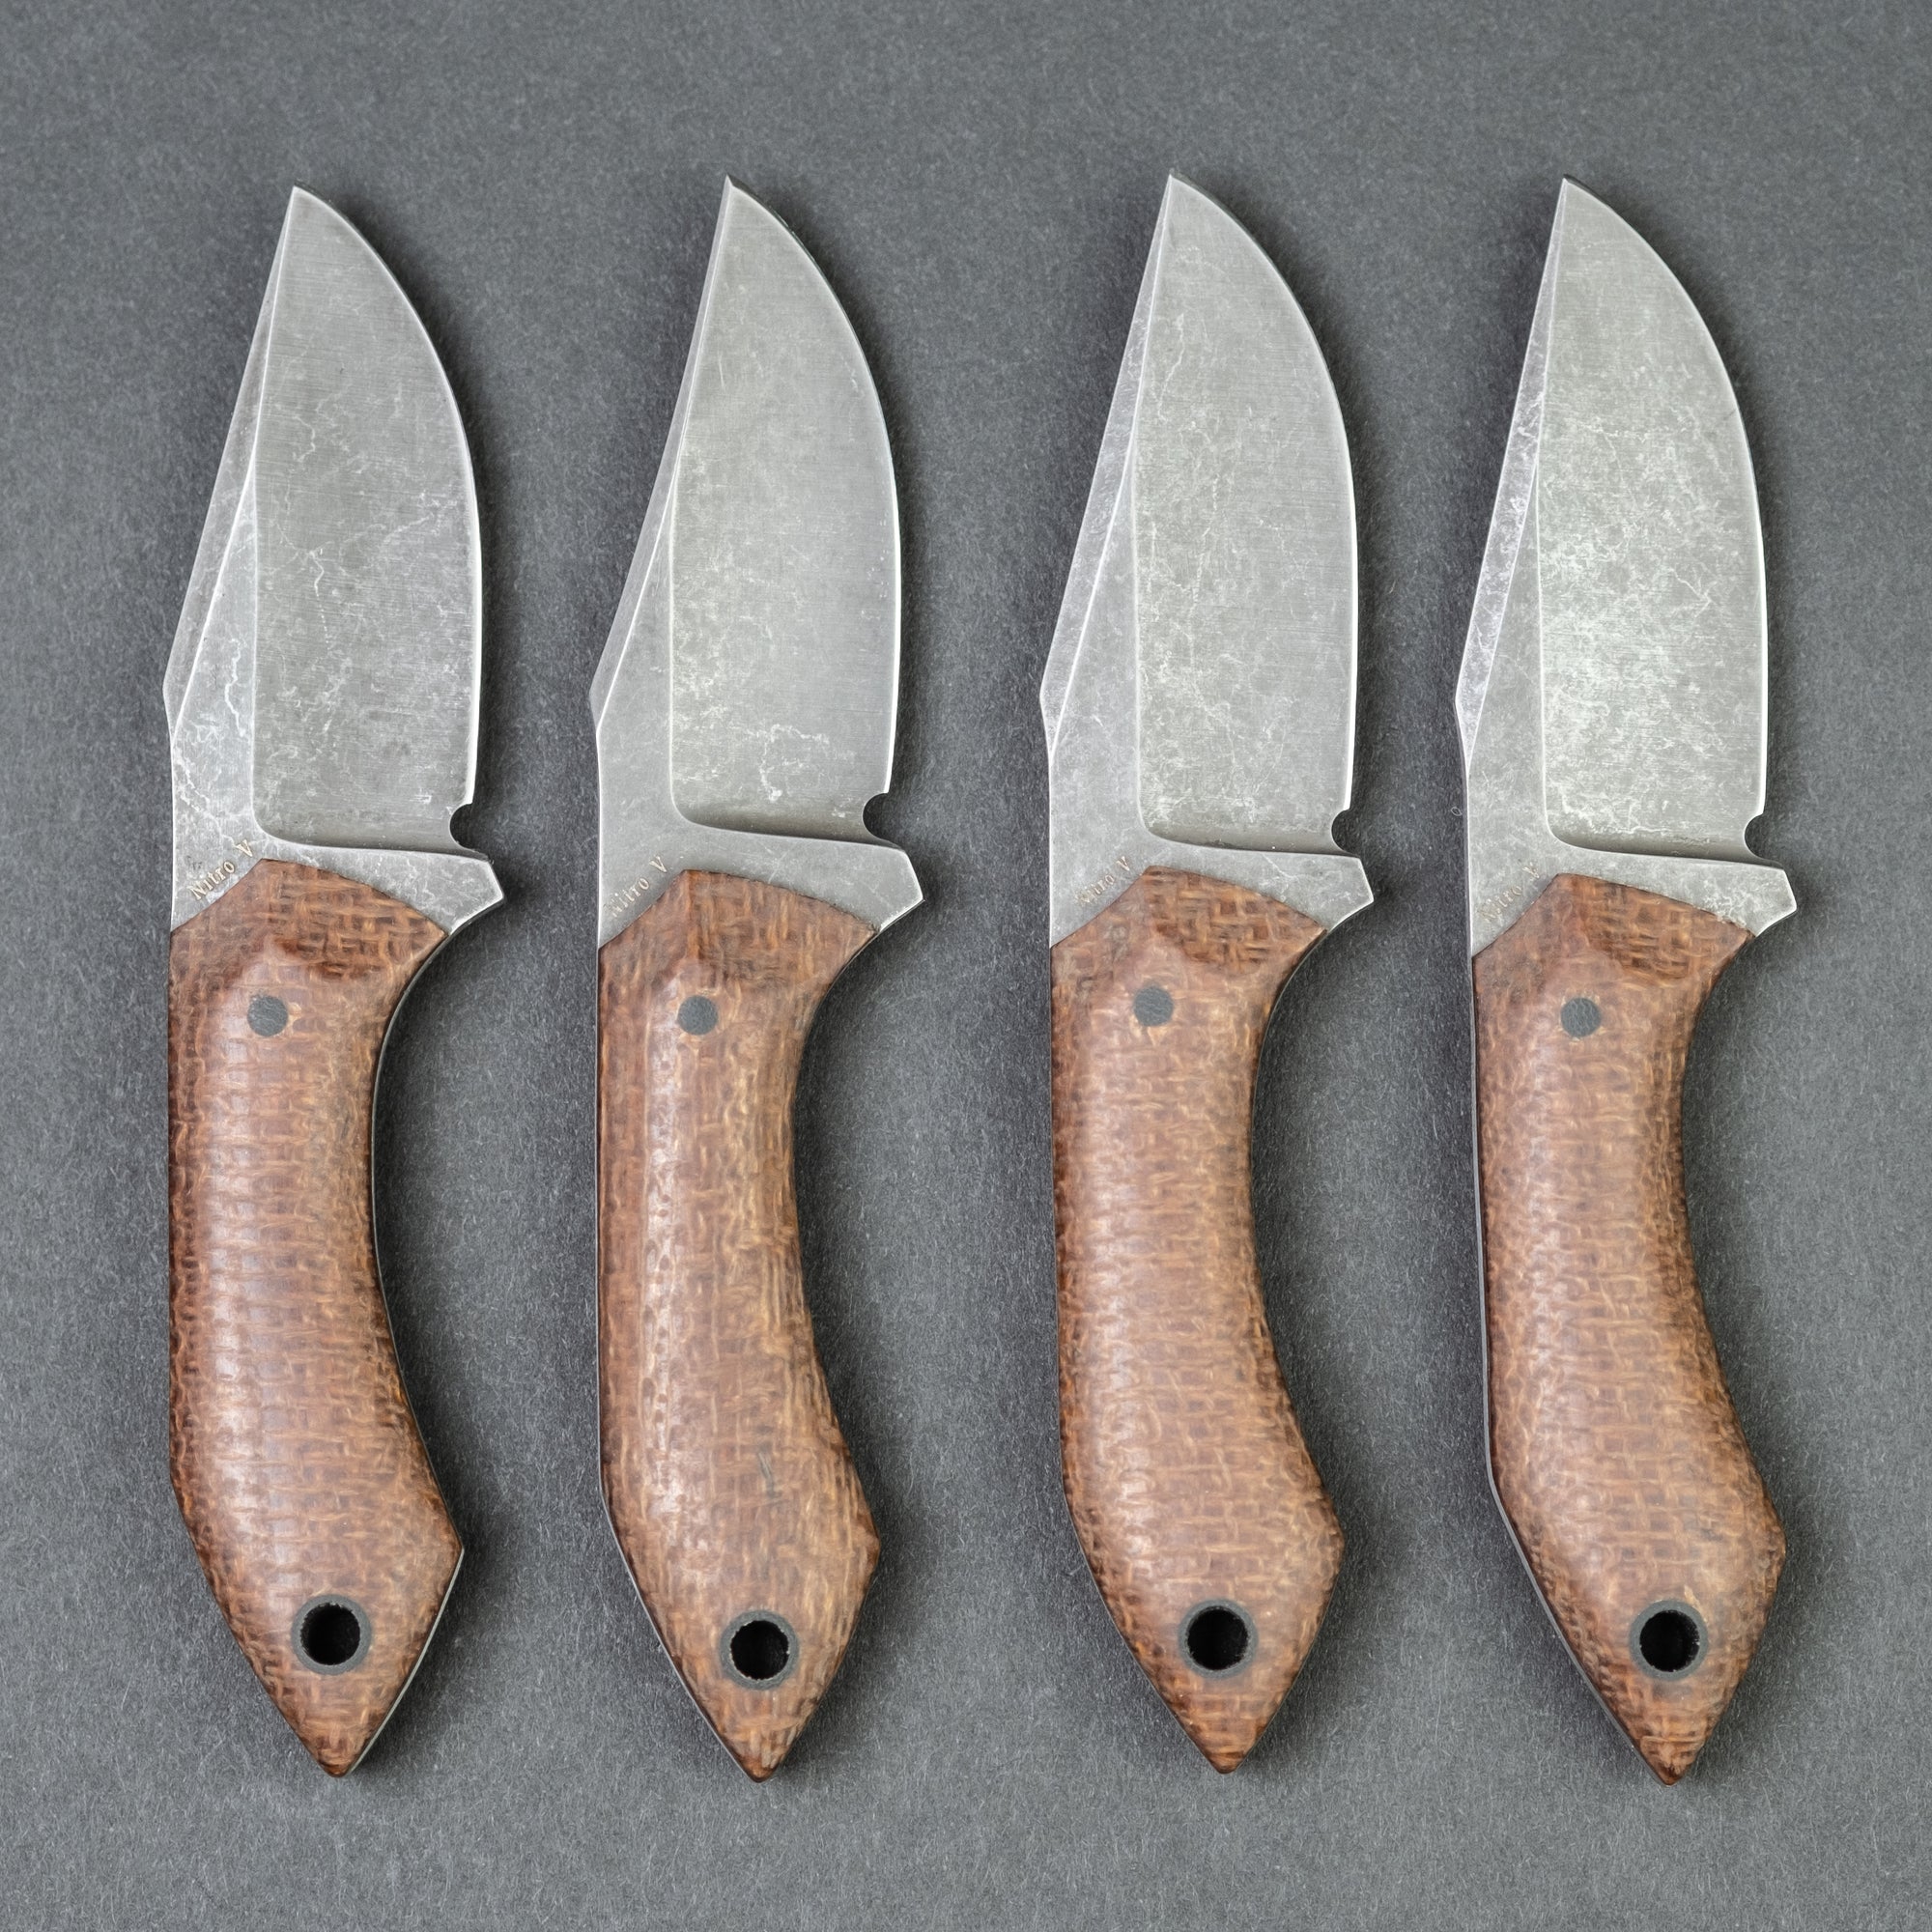 Böker Creates New Kitchen Knives That Welcome a Patina